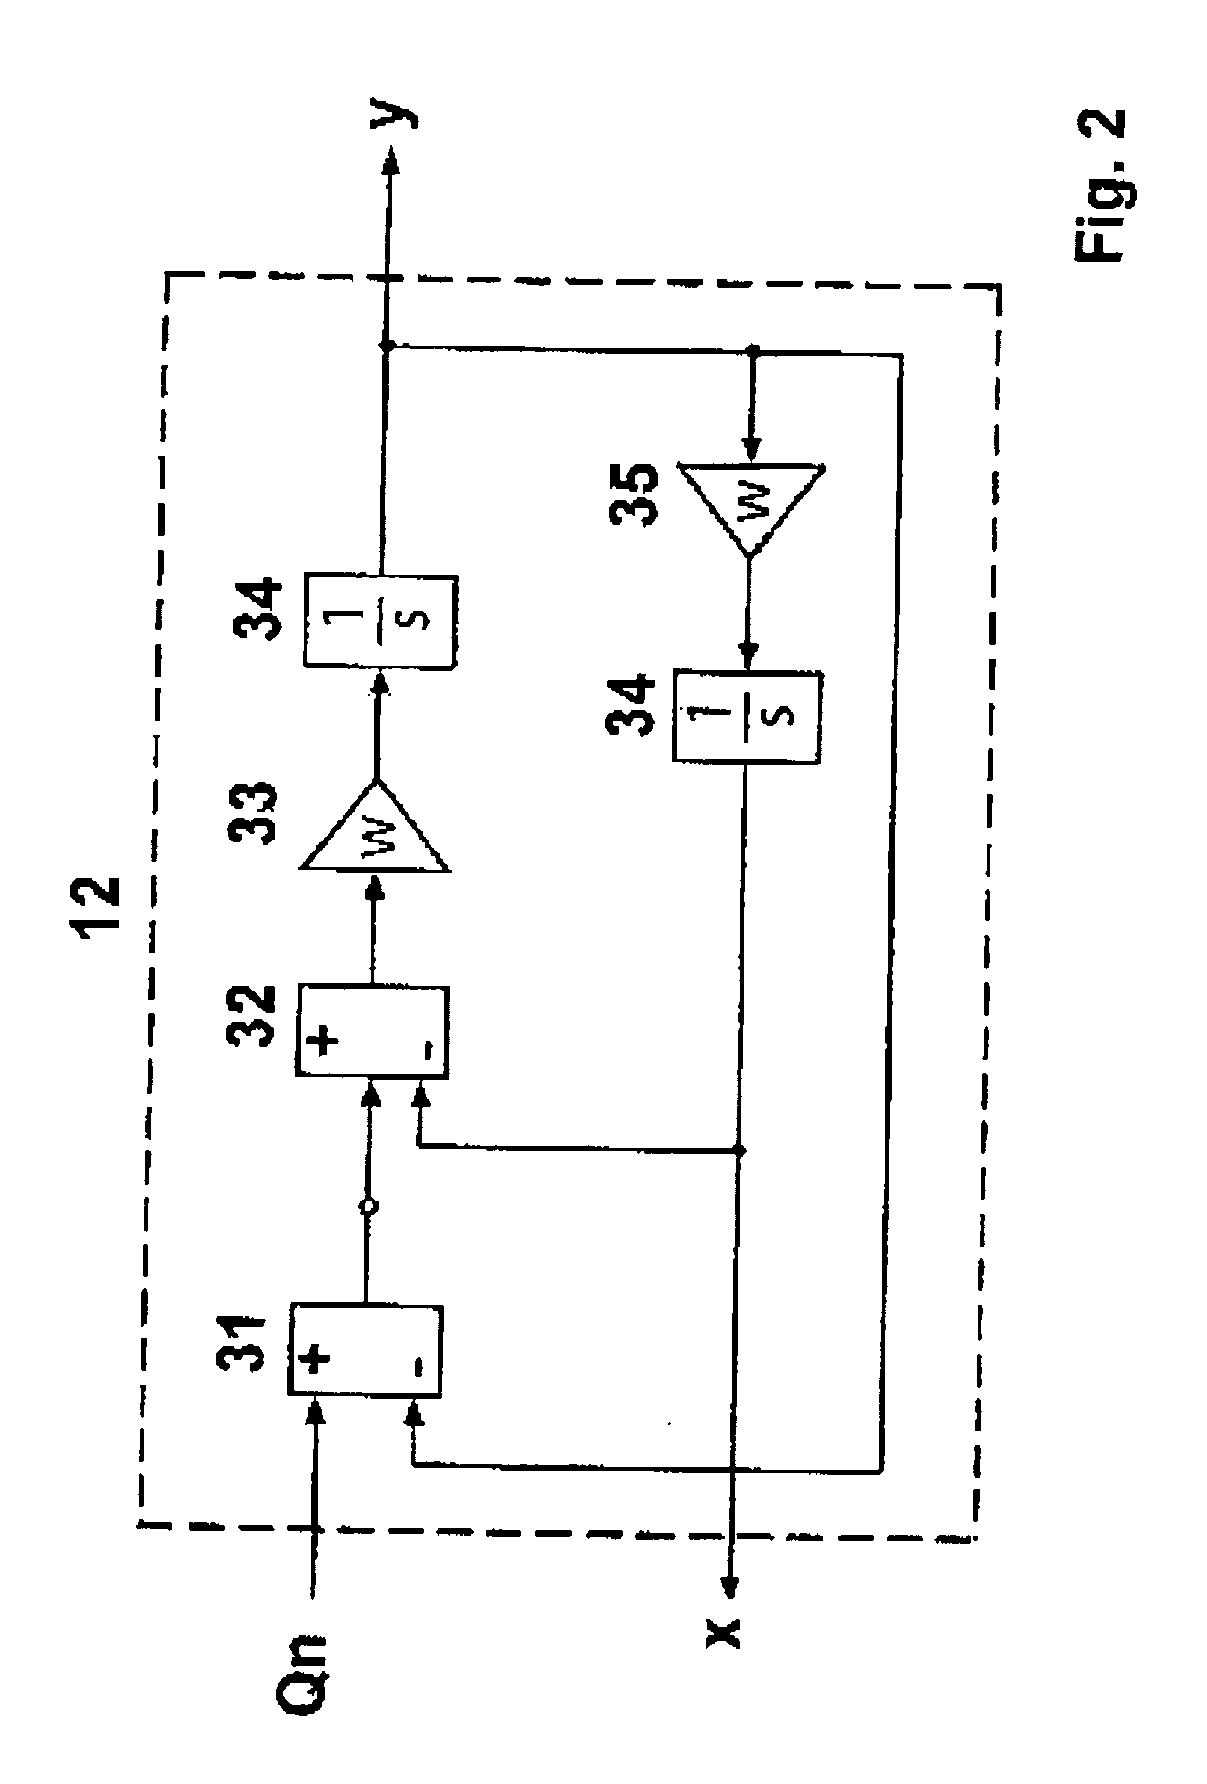 Method for detecting an isolated network